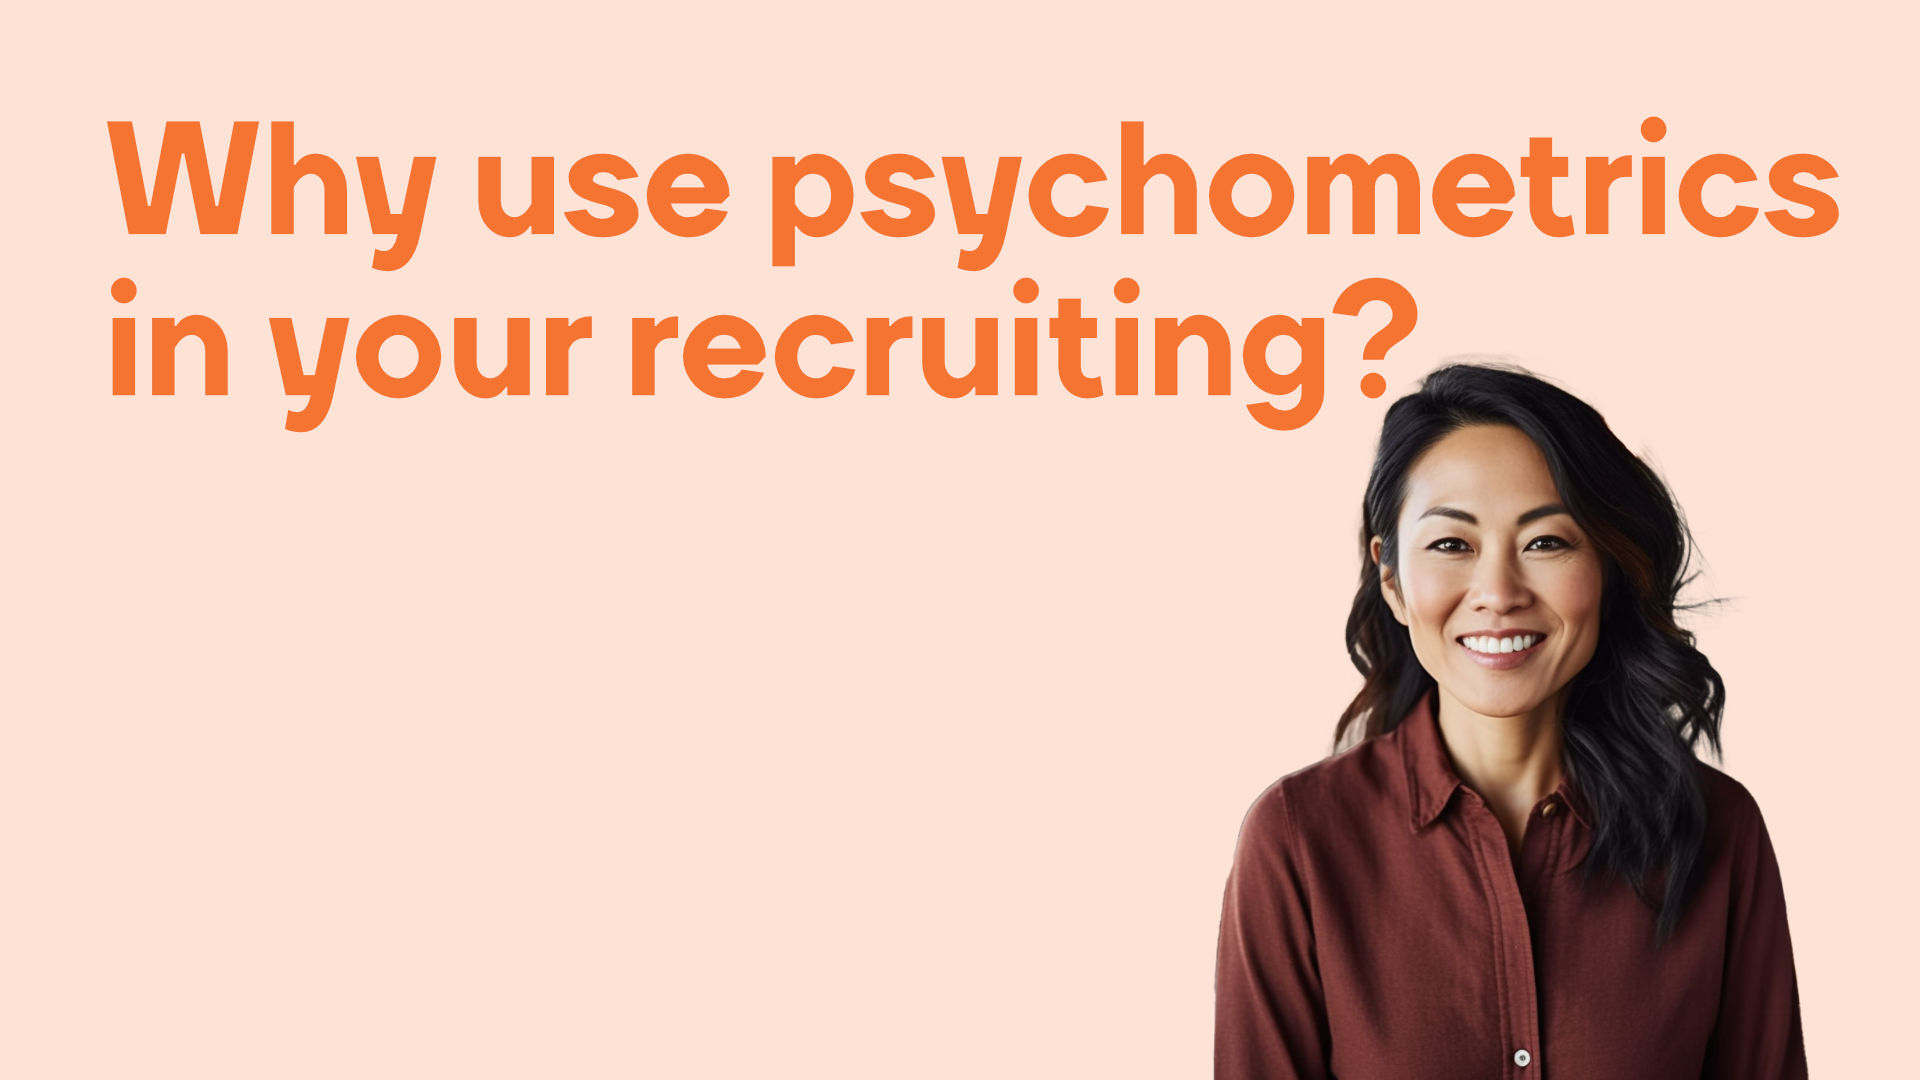 Why use psychometrics in your recruiting?